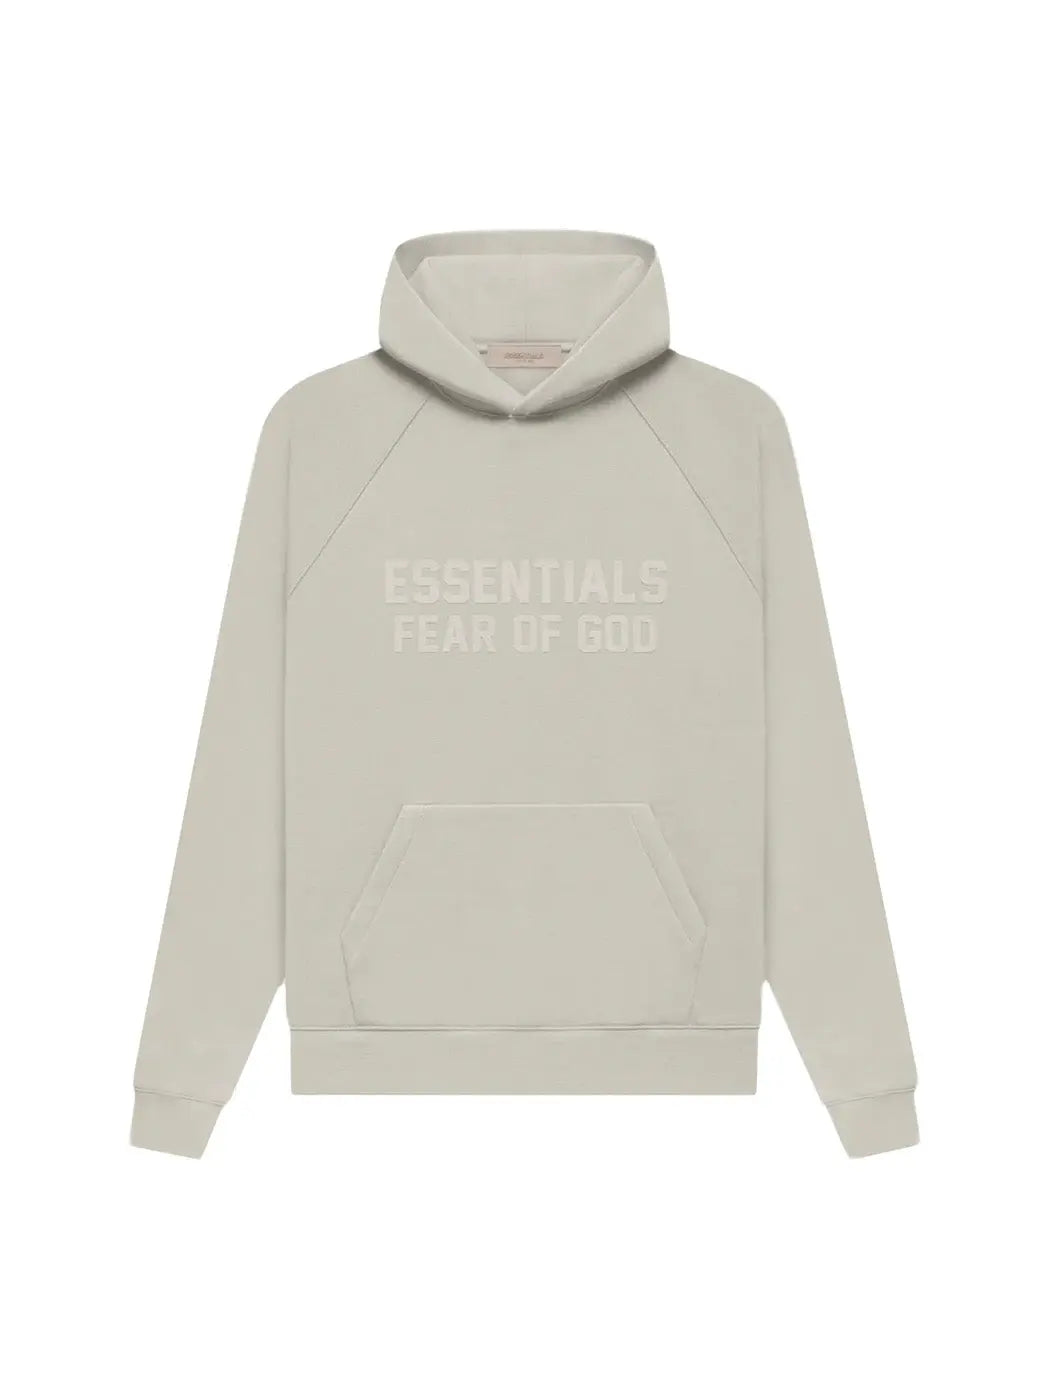 Fear of God Essentials Hoodie Smoke (FW22) in Auckland, New Zealand - Shop name